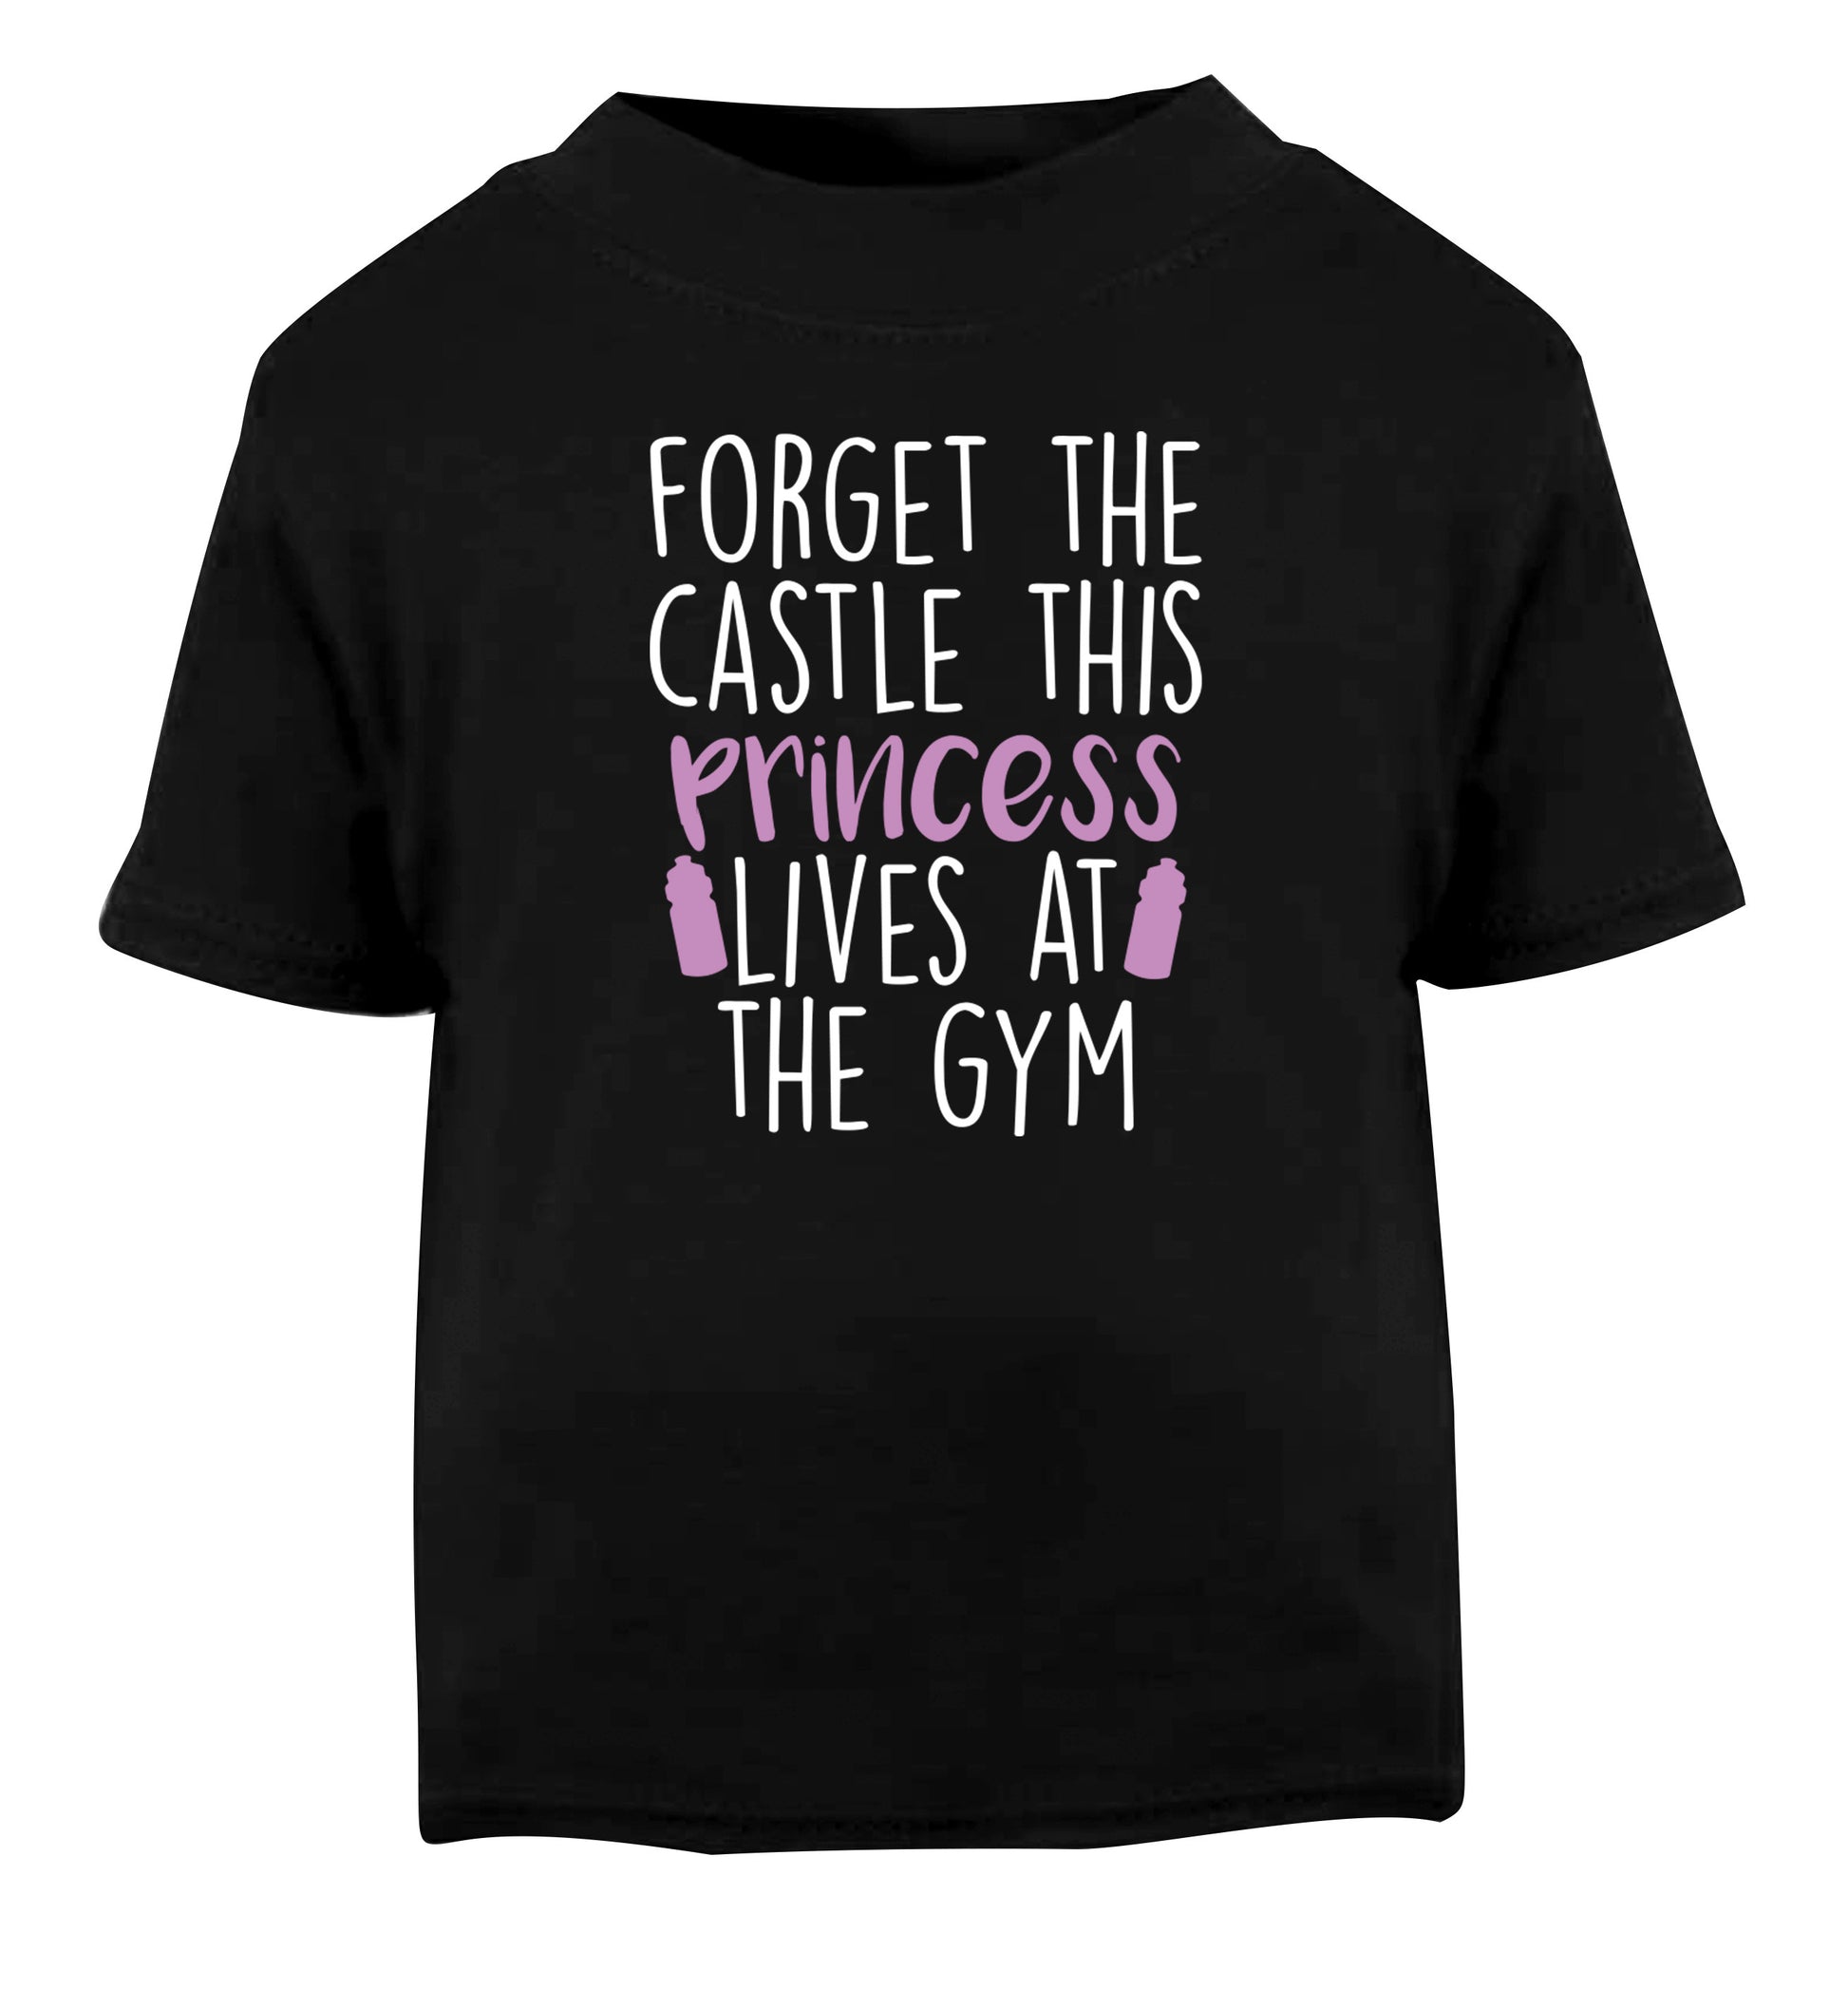 Forget the castle this princess lives at the gym Black Baby Toddler Tshirt 2 years